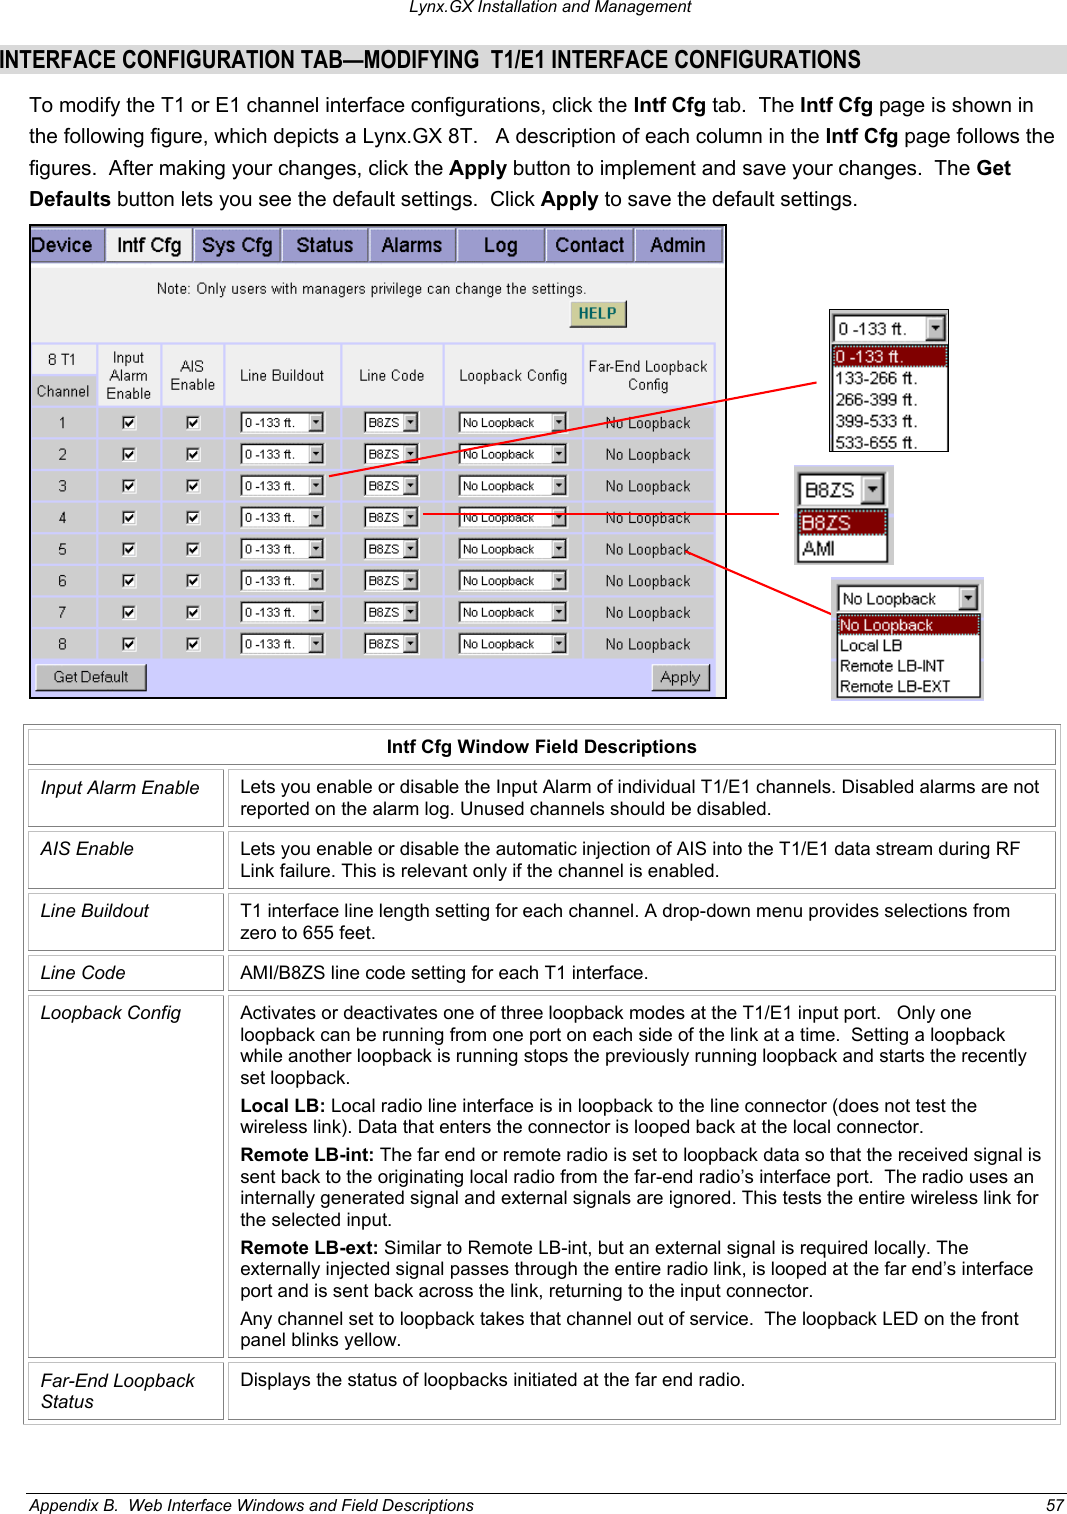 Lynx.GX Installation and Management INTERFACE CONFIGURATION TAB—MODIFYING  T1/E1 INTERFACE CONFIGURATIONS To modify the T1 or E1 channel interface configurations, click the Intf Cfg tab.  The Intf Cfg page is shown in the following figure, which depicts a Lynx.GX 8T.   A description of each column in the Intf Cfg page follows the figures.  After making your changes, click the Apply button to implement and save your changes.  The Get Defaults button lets you see the default settings.  Click Apply to save the default settings.     Intf Cfg Window Field Descriptions Input Alarm Enable  Lets you enable or disable the Input Alarm of individual T1/E1 channels. Disabled alarms are not reported on the alarm log. Unused channels should be disabled. AIS Enable  Lets you enable or disable the automatic injection of AIS into the T1/E1 data stream during RF Link failure. This is relevant only if the channel is enabled. Line Buildout  T1 interface line length setting for each channel. A drop-down menu provides selections from zero to 655 feet. Line Code  AMI/B8ZS line code setting for each T1 interface. Loopback Config  Activates or deactivates one of three loopback modes at the T1/E1 input port.   Only one loopback can be running from one port on each side of the link at a time.  Setting a loopback while another loopback is running stops the previously running loopback and starts the recently set loopback. Local LB: Local radio line interface is in loopback to the line connector (does not test the wireless link). Data that enters the connector is looped back at the local connector. Remote LB-int: The far end or remote radio is set to loopback data so that the received signal is sent back to the originating local radio from the far-end radio’s interface port.  The radio uses an internally generated signal and external signals are ignored. This tests the entire wireless link for the selected input. Remote LB-ext: Similar to Remote LB-int, but an external signal is required locally. The externally injected signal passes through the entire radio link, is looped at the far end’s interface port and is sent back across the link, returning to the input connector. Any channel set to loopback takes that channel out of service.  The loopback LED on the front panel blinks yellow. Far-End Loopback Status Displays the status of loopbacks initiated at the far end radio. Appendix B.  Web Interface Windows and Field Descriptions  57 